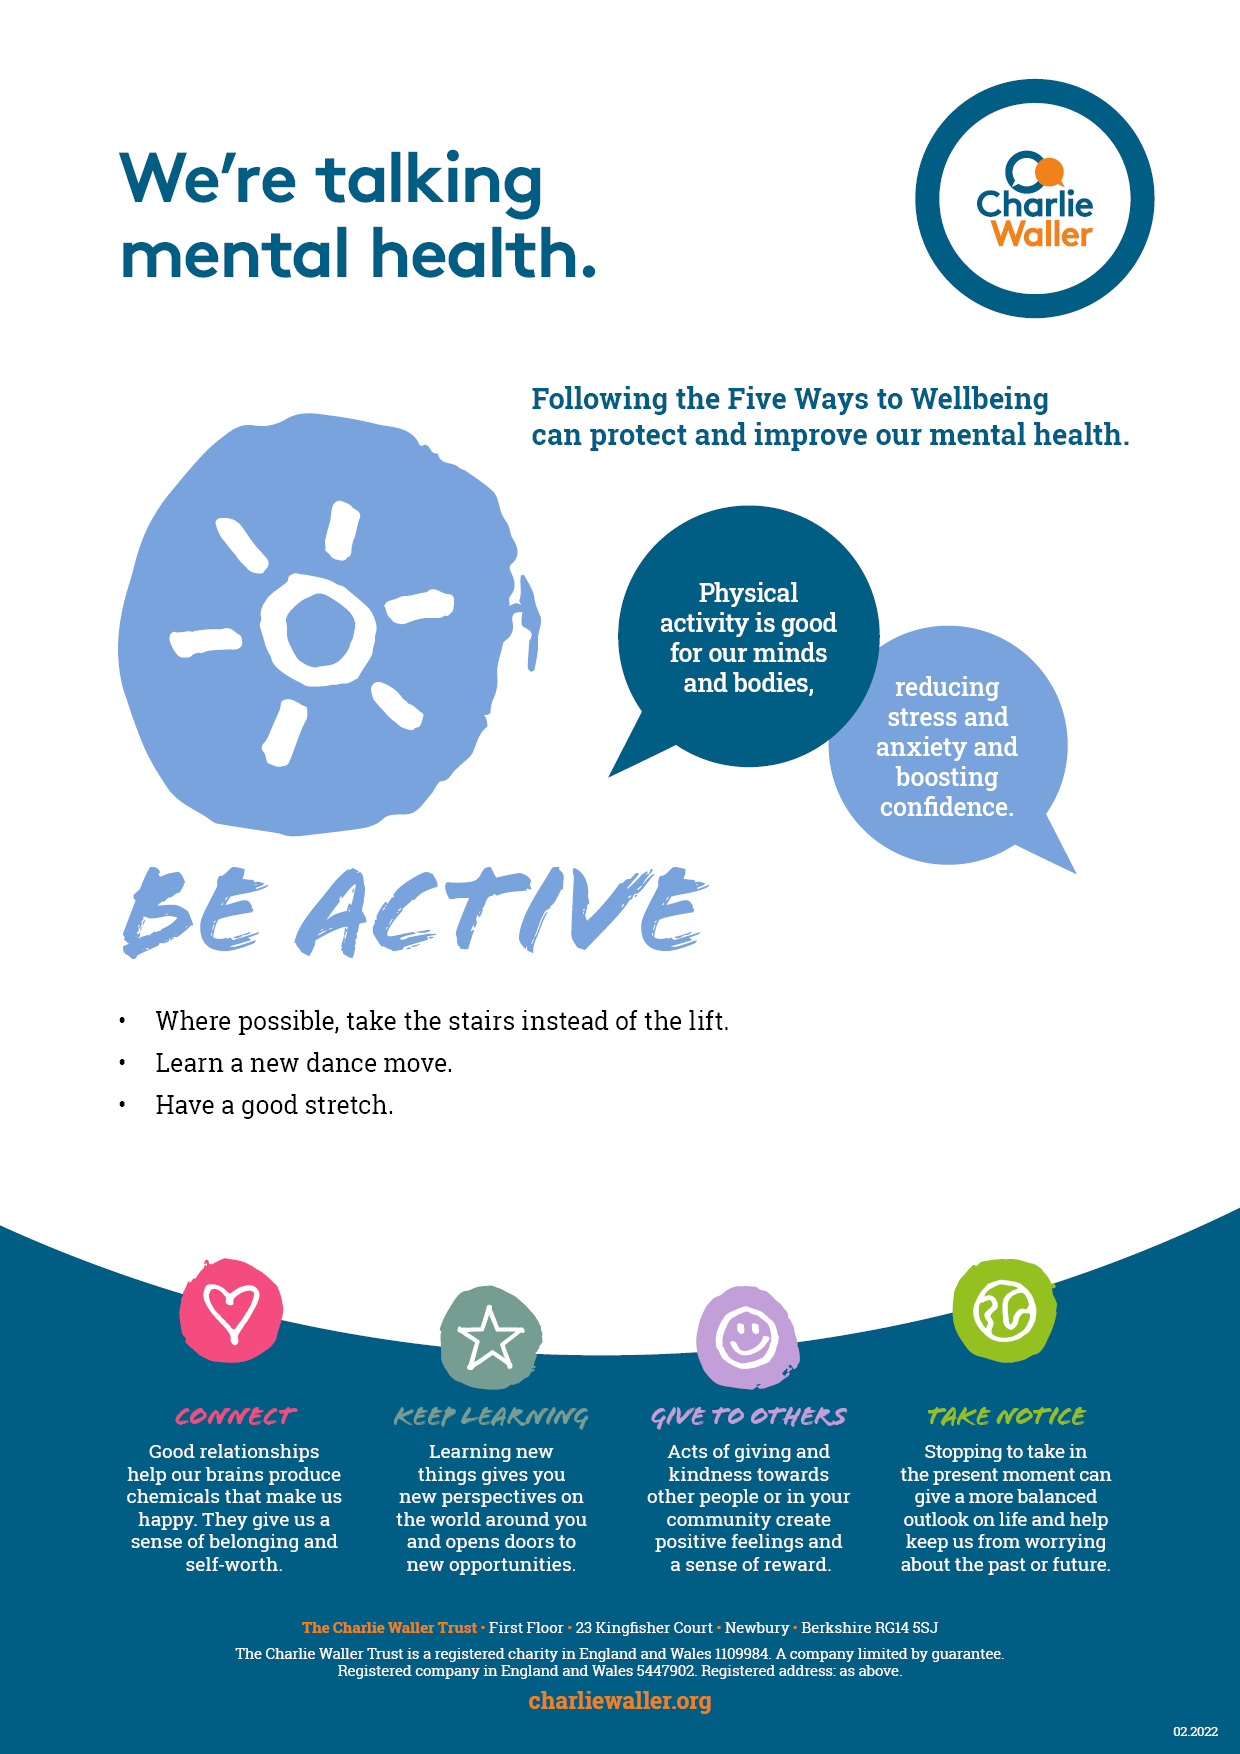 Five Ways to Wellbeing posters for positive mental health Charlie Waller